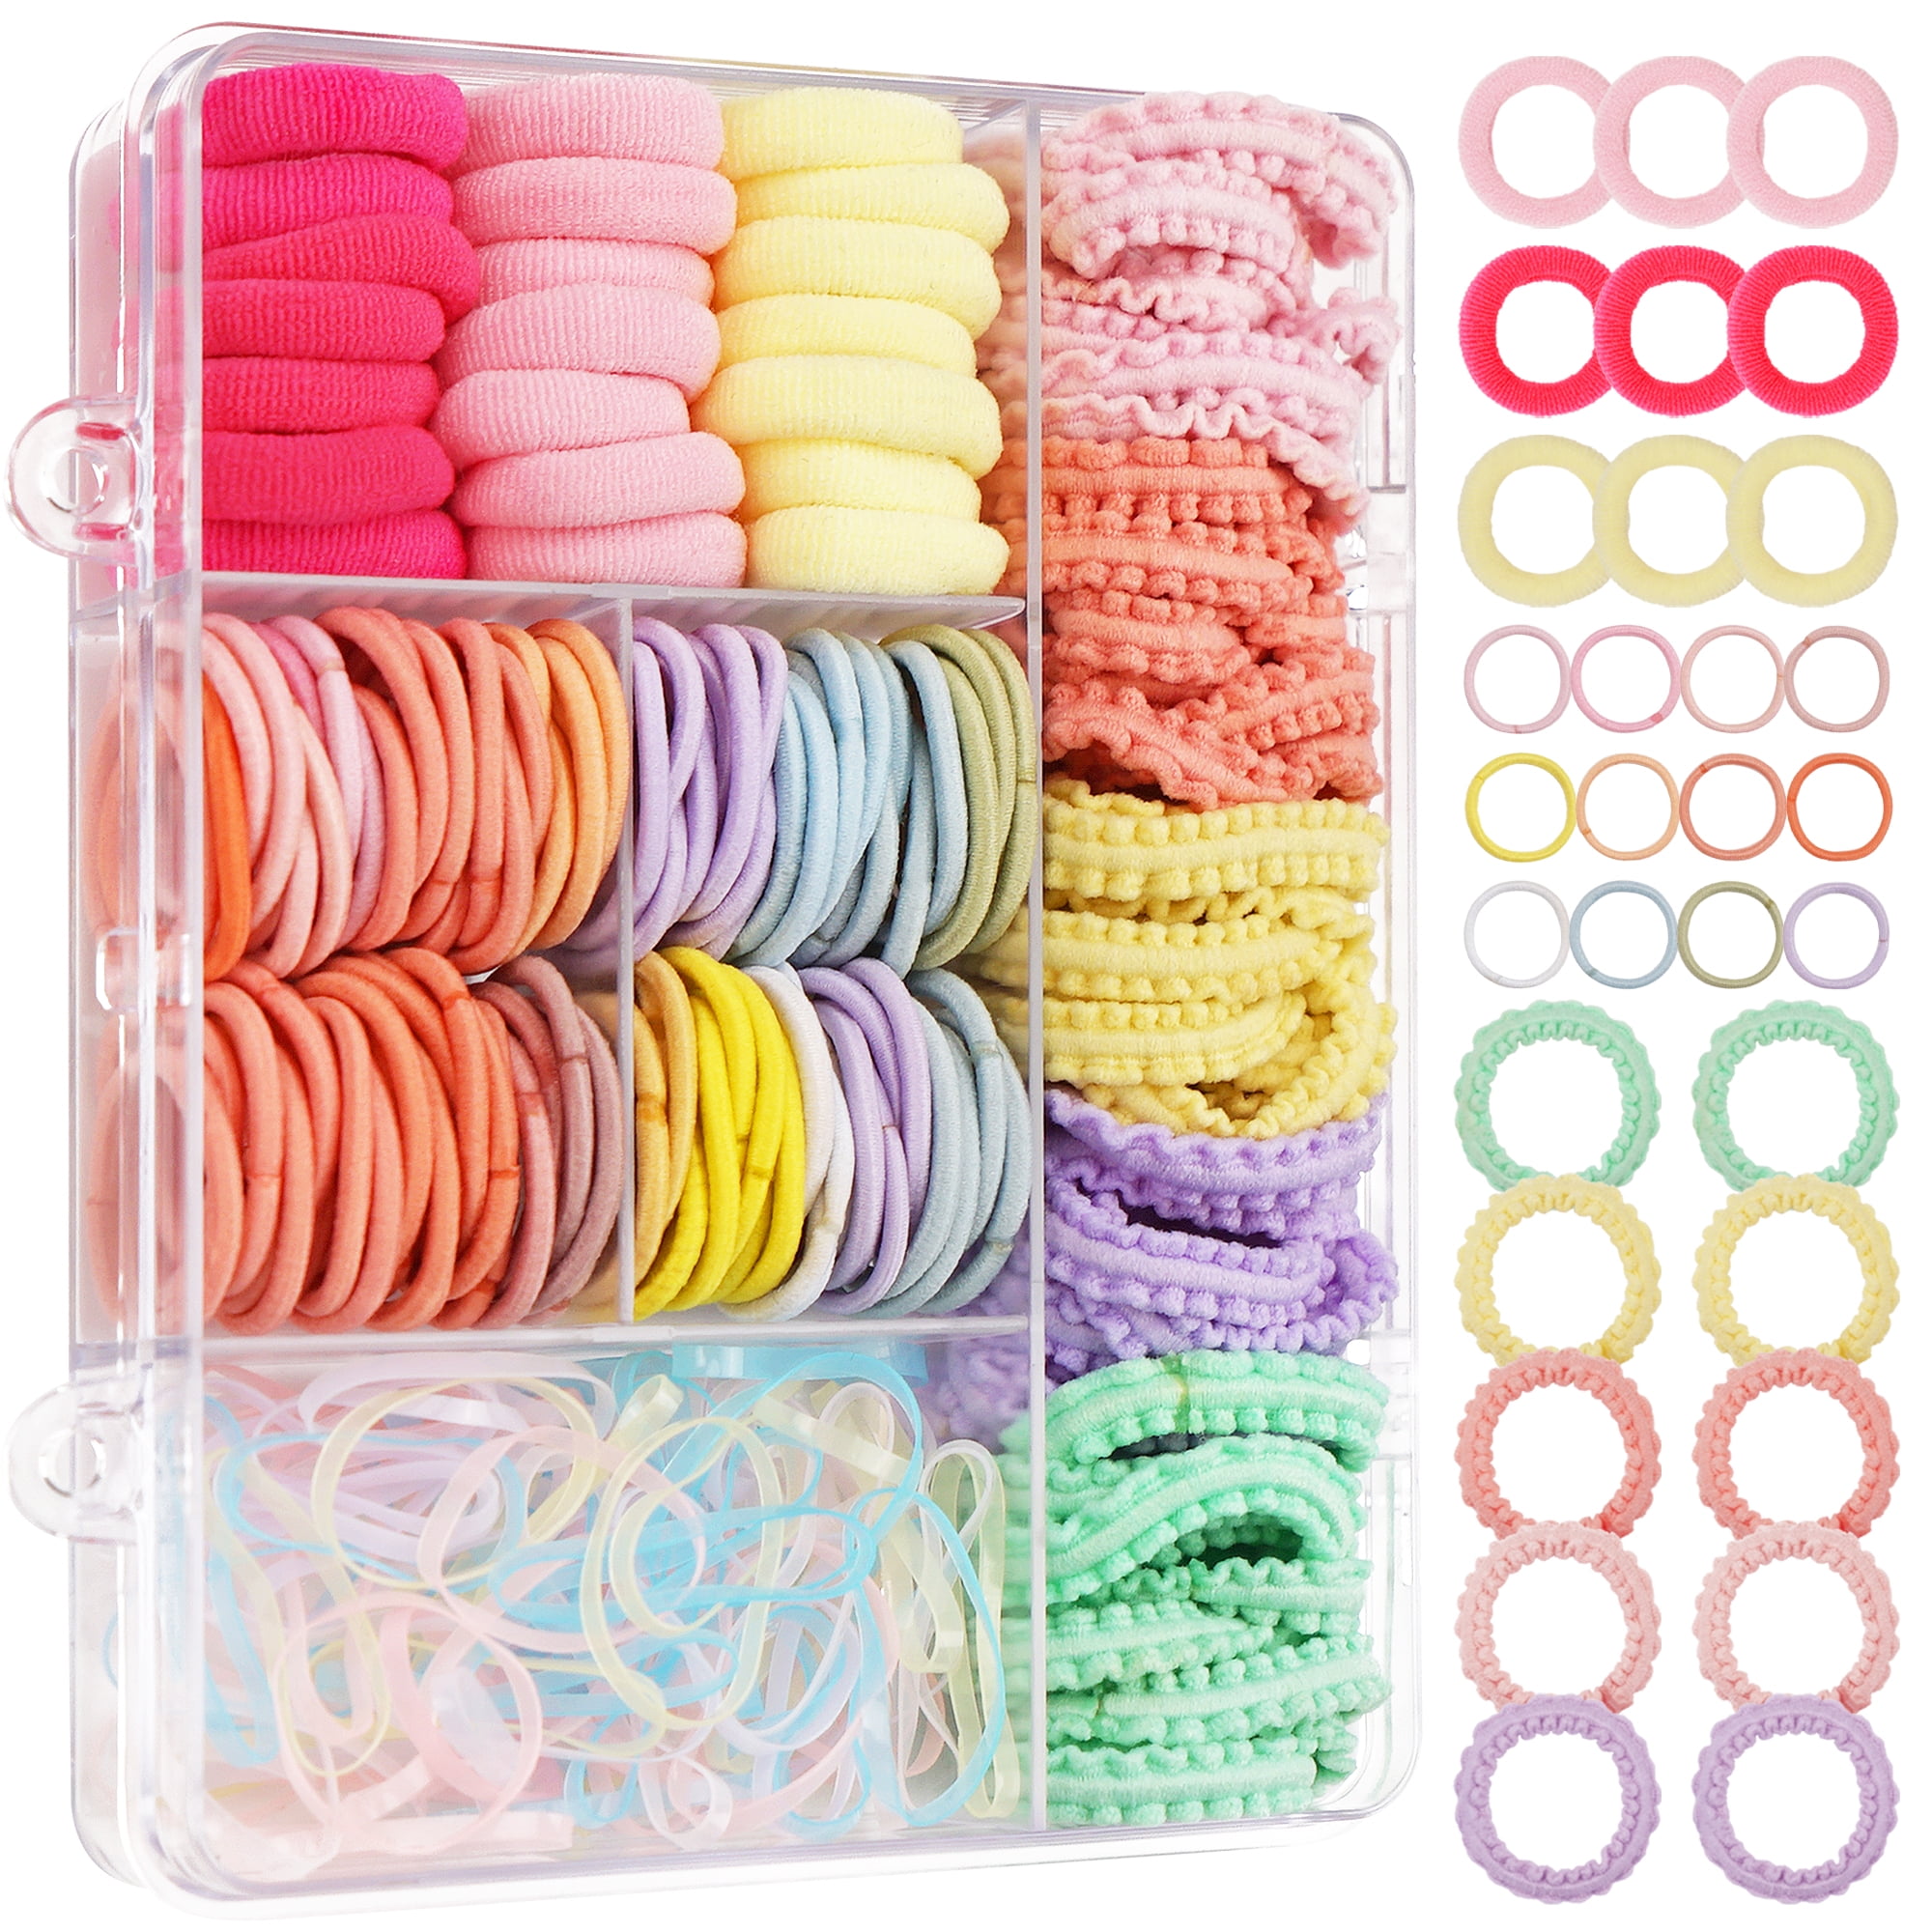 JOYOYO 270 Pcs Elastic Hair Ties, Colorful Hair Rubber Bands Set for Hair with Organizer Box,Hair Accessories for Toddler, Baby, Girl, Infant Girl's